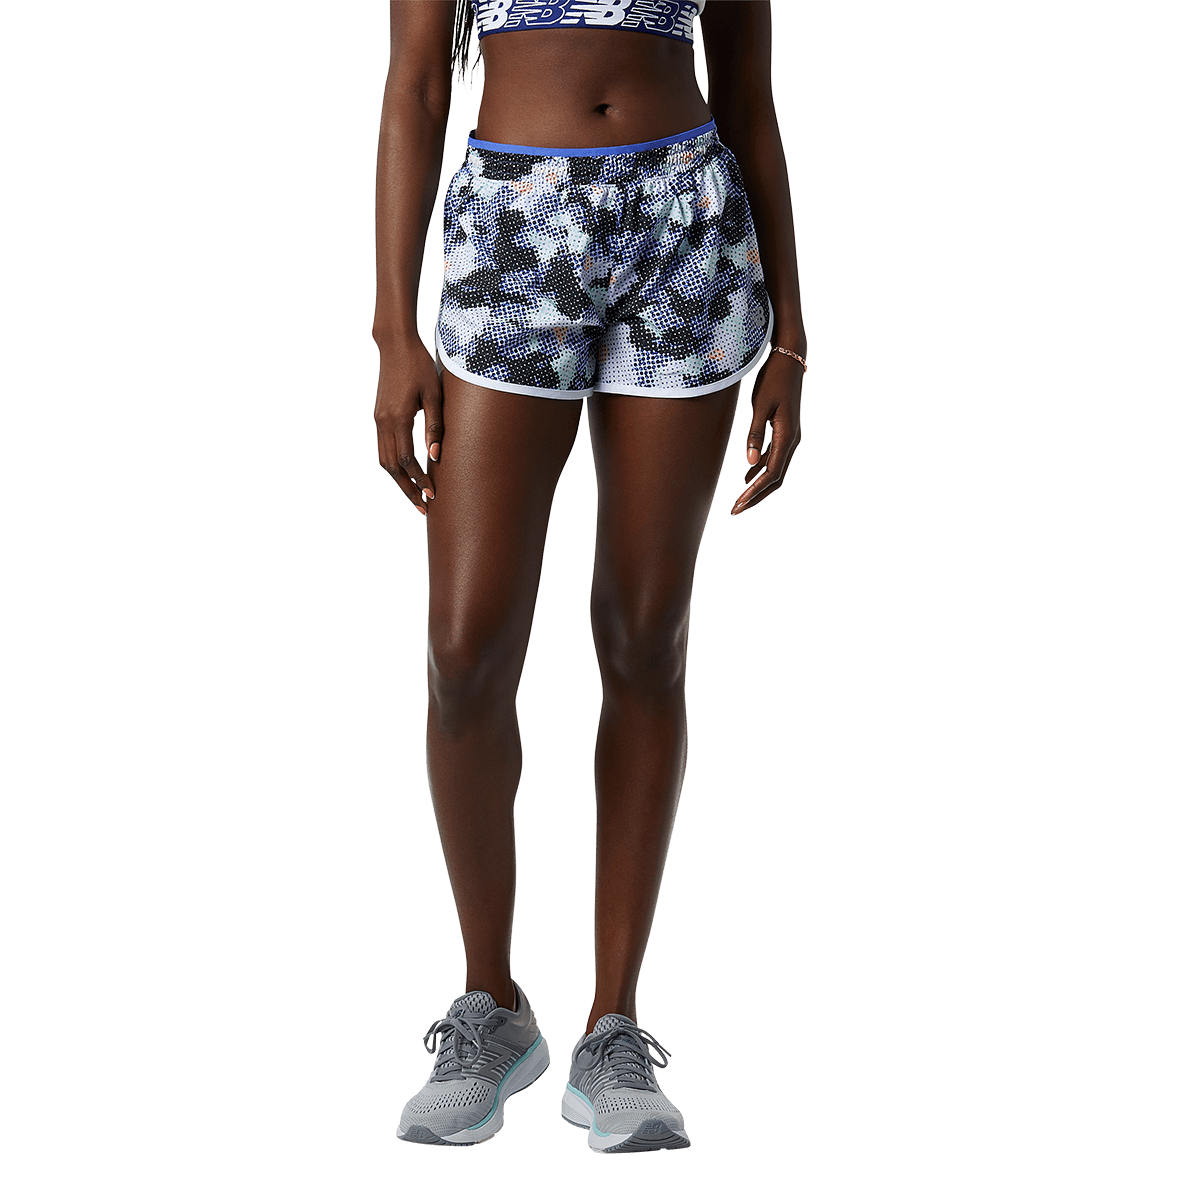 New Balance Printed Accelerate 2.5" Short, , large image number null